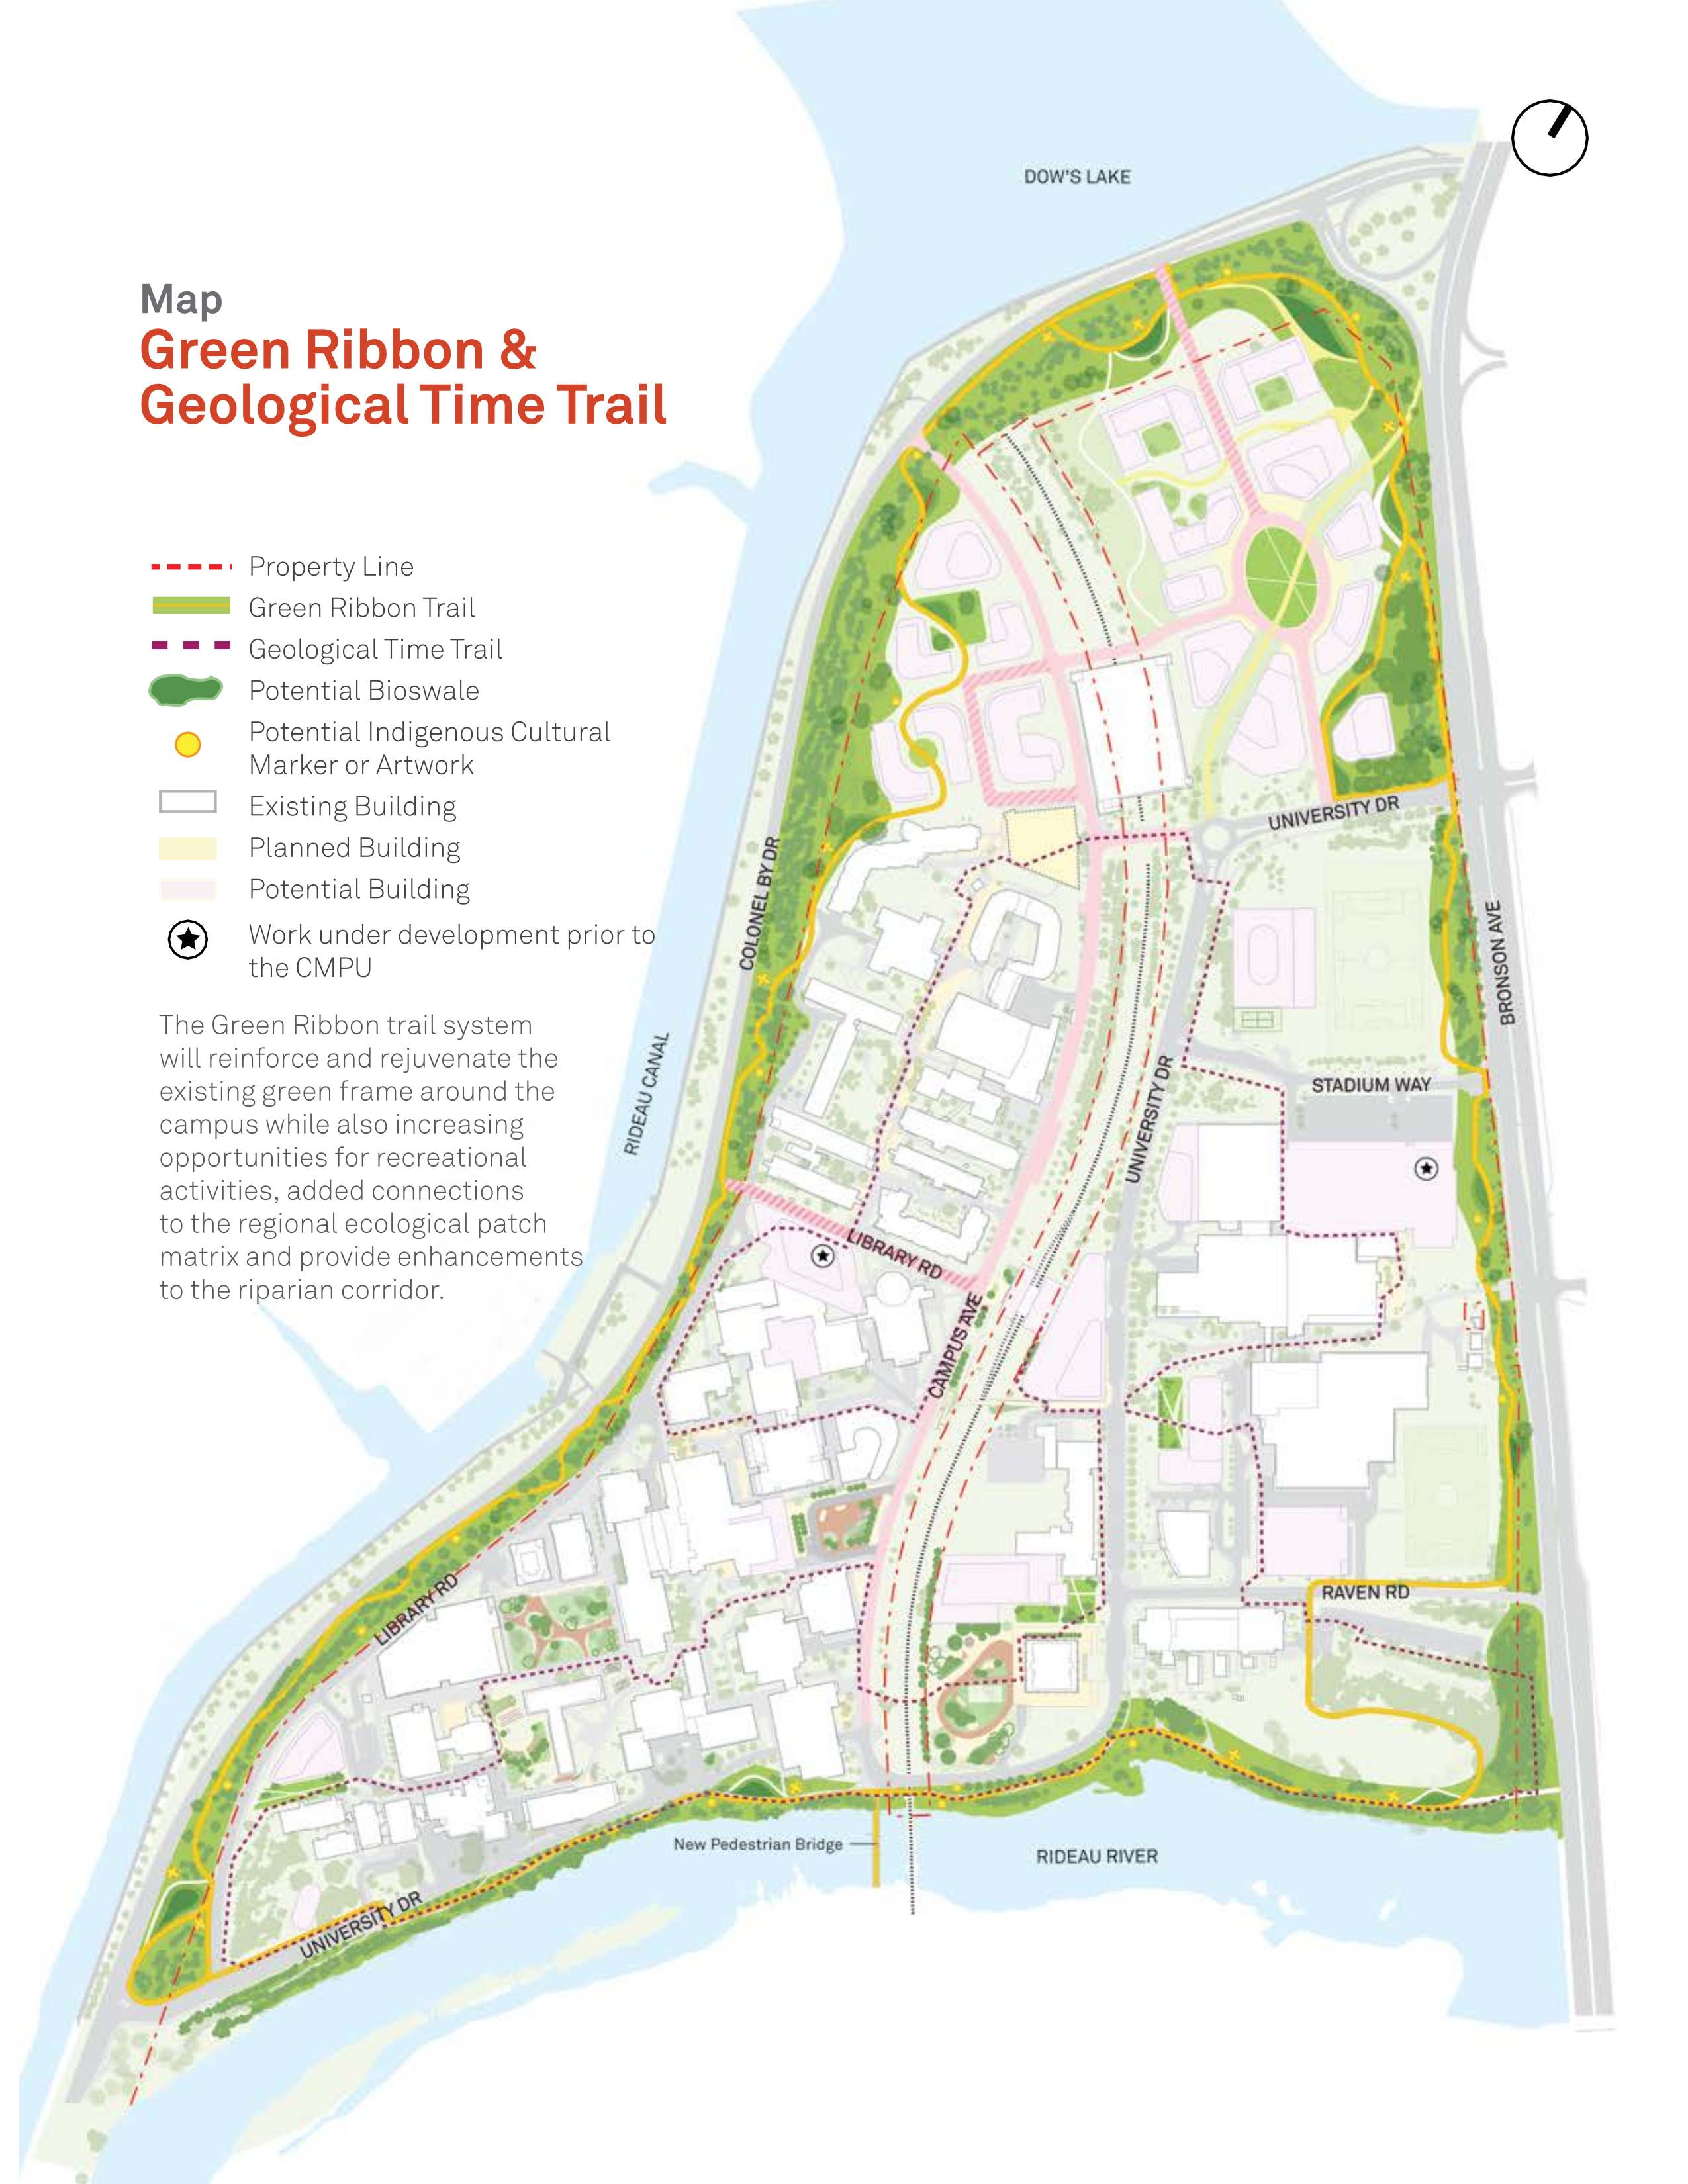 Aerial rendition of the green ribbon and geological time trail map